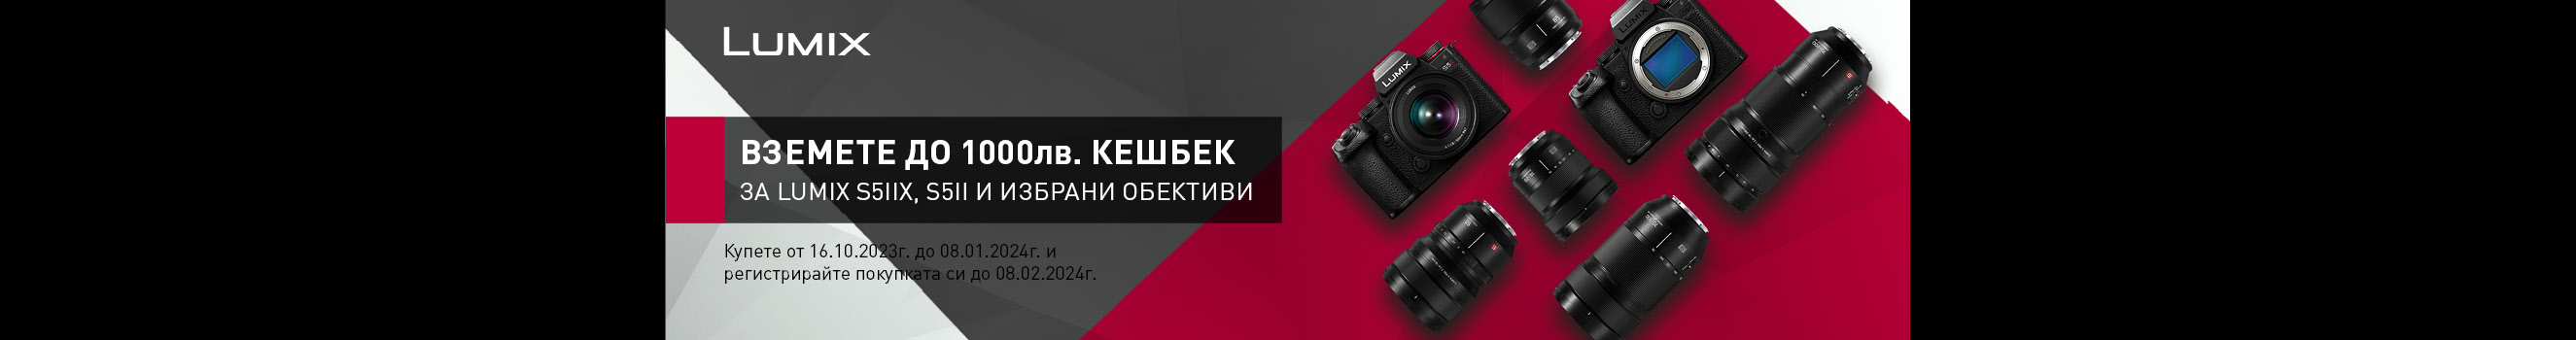  Get up to -1000 BGN cash-back discount for Panasonic Lumix S cameras and lenses after registration.